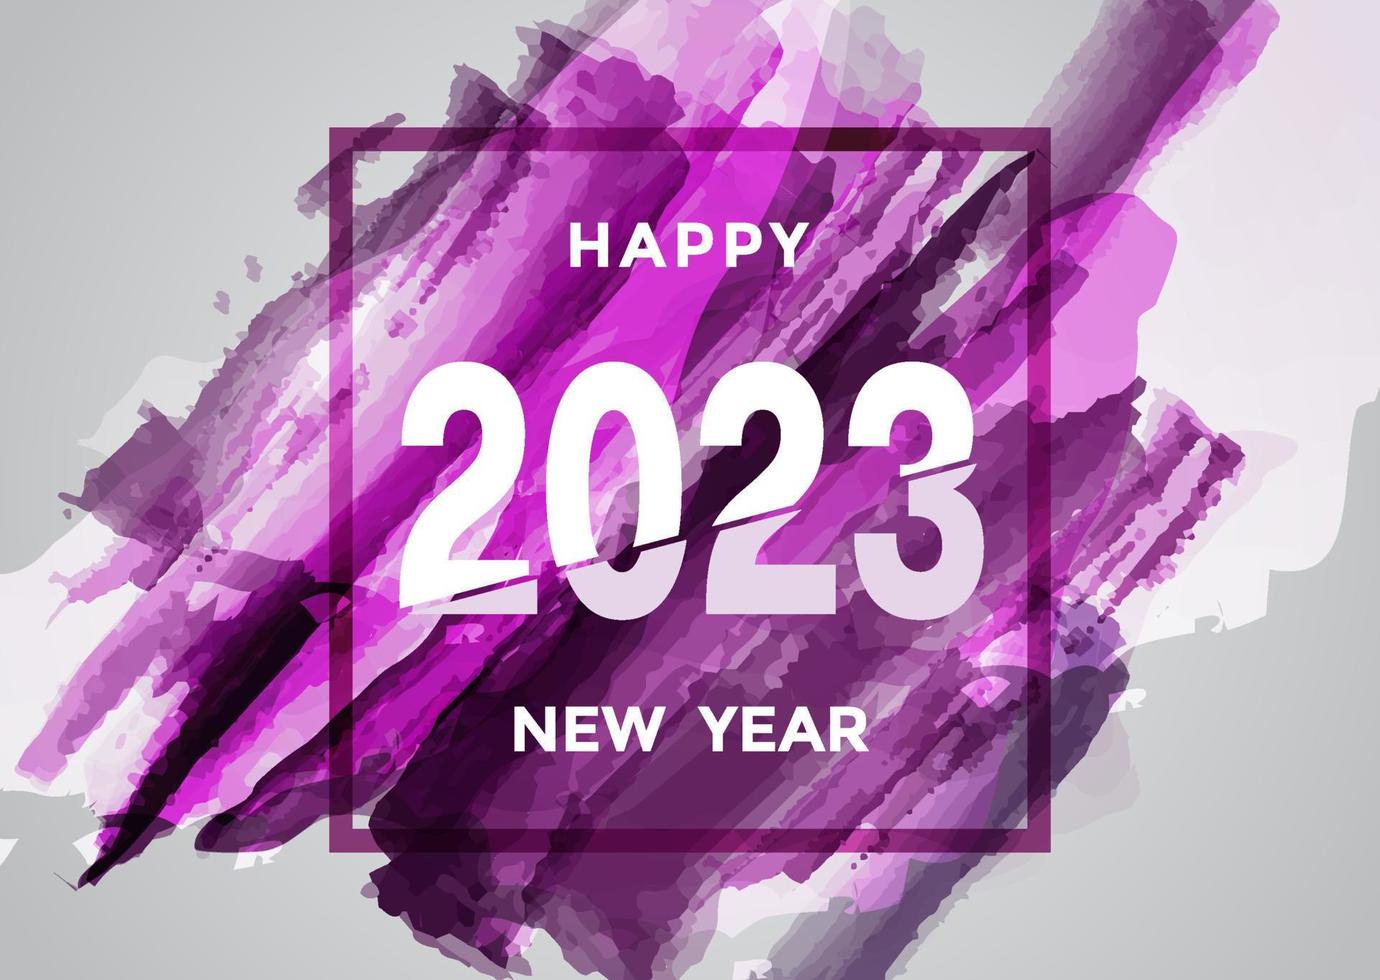 Colorful Watercolor Happy new year 2023 with a Square line box background vector